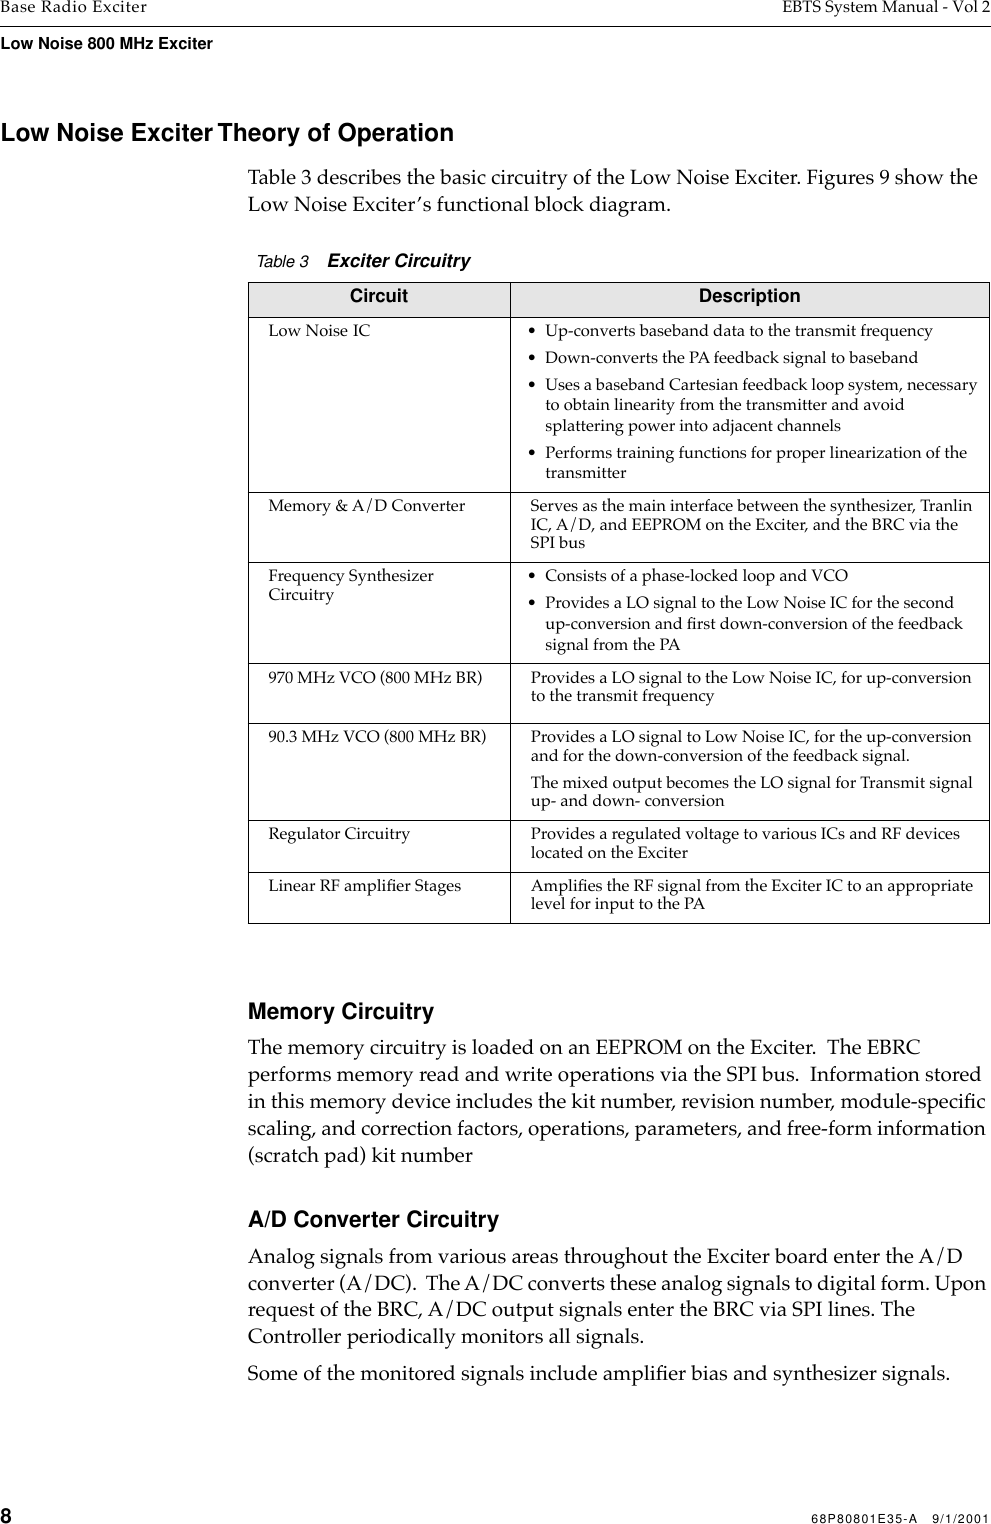 868P80801E35-A   9/1/2001Base Radio Exciter EBTS System Manual - Vol 2Low Noise 800 MHz Exciter Low Noise Exciter Theory of OperationTable 3 describes the basic circuitry of the Low Noise Exciter. Figures 9 show the Low Noise Exciter’s functional block diagram.Memory CircuitryThe memory circuitry is loaded on an EEPROM on the Exciter.  The EBRC performs memory read and write operations via the SPI bus.  Information stored in this memory device includes the kit number, revision number, module-speciﬁc scaling, and correction factors, operations, parameters, and free-form information (scratch pad) kit numberA/D Converter CircuitryAnalog signals from various areas throughout the Exciter board enter the A/D converter (A/DC).  The A/DC converts these analog signals to digital form. Upon request of the BRC, A/DC output signals enter the BRC via SPI lines. The Controller periodically monitors all signals.Some of the monitored signals include ampliﬁer bias and synthesizer signals. Table 3    Exciter Circuitry Circuit DescriptionLow Noise IC • Up-converts baseband data to the transmit frequency• Down-converts the PA feedback signal to baseband• Uses a baseband Cartesian feedback loop system, necessary to obtain linearity from the transmitter and avoid splattering power into adjacent channels• Performs training functions for proper linearization of the transmitterMemory &amp; A/D Converter Serves as the main interface between the synthesizer, Tranlin IC, A/D, and EEPROM on the Exciter, and the BRC via the SPI busFrequency Synthesizer Circuitry• Consists of a phase-locked loop and VCO• Provides a LO signal to the Low Noise IC for the second up-conversion and ﬁrst down-conversion of the feedback signal from the PA970 MHz VCO (800 MHz BR) Provides a LO signal to the Low Noise IC, for up-conversion to the transmit frequency90.3 MHz VCO (800 MHz BR) Provides a LO signal to Low Noise IC, for the up-conversion and for the down-conversion of the feedback signal. The mixed output becomes the LO signal for Transmit signal up- and down- conversionRegulator Circuitry Provides a regulated voltage to various ICs and RF devices located on the ExciterLinear RF ampliﬁer Stages Ampliﬁes the RF signal from the Exciter IC to an appropriate level for input to the PA